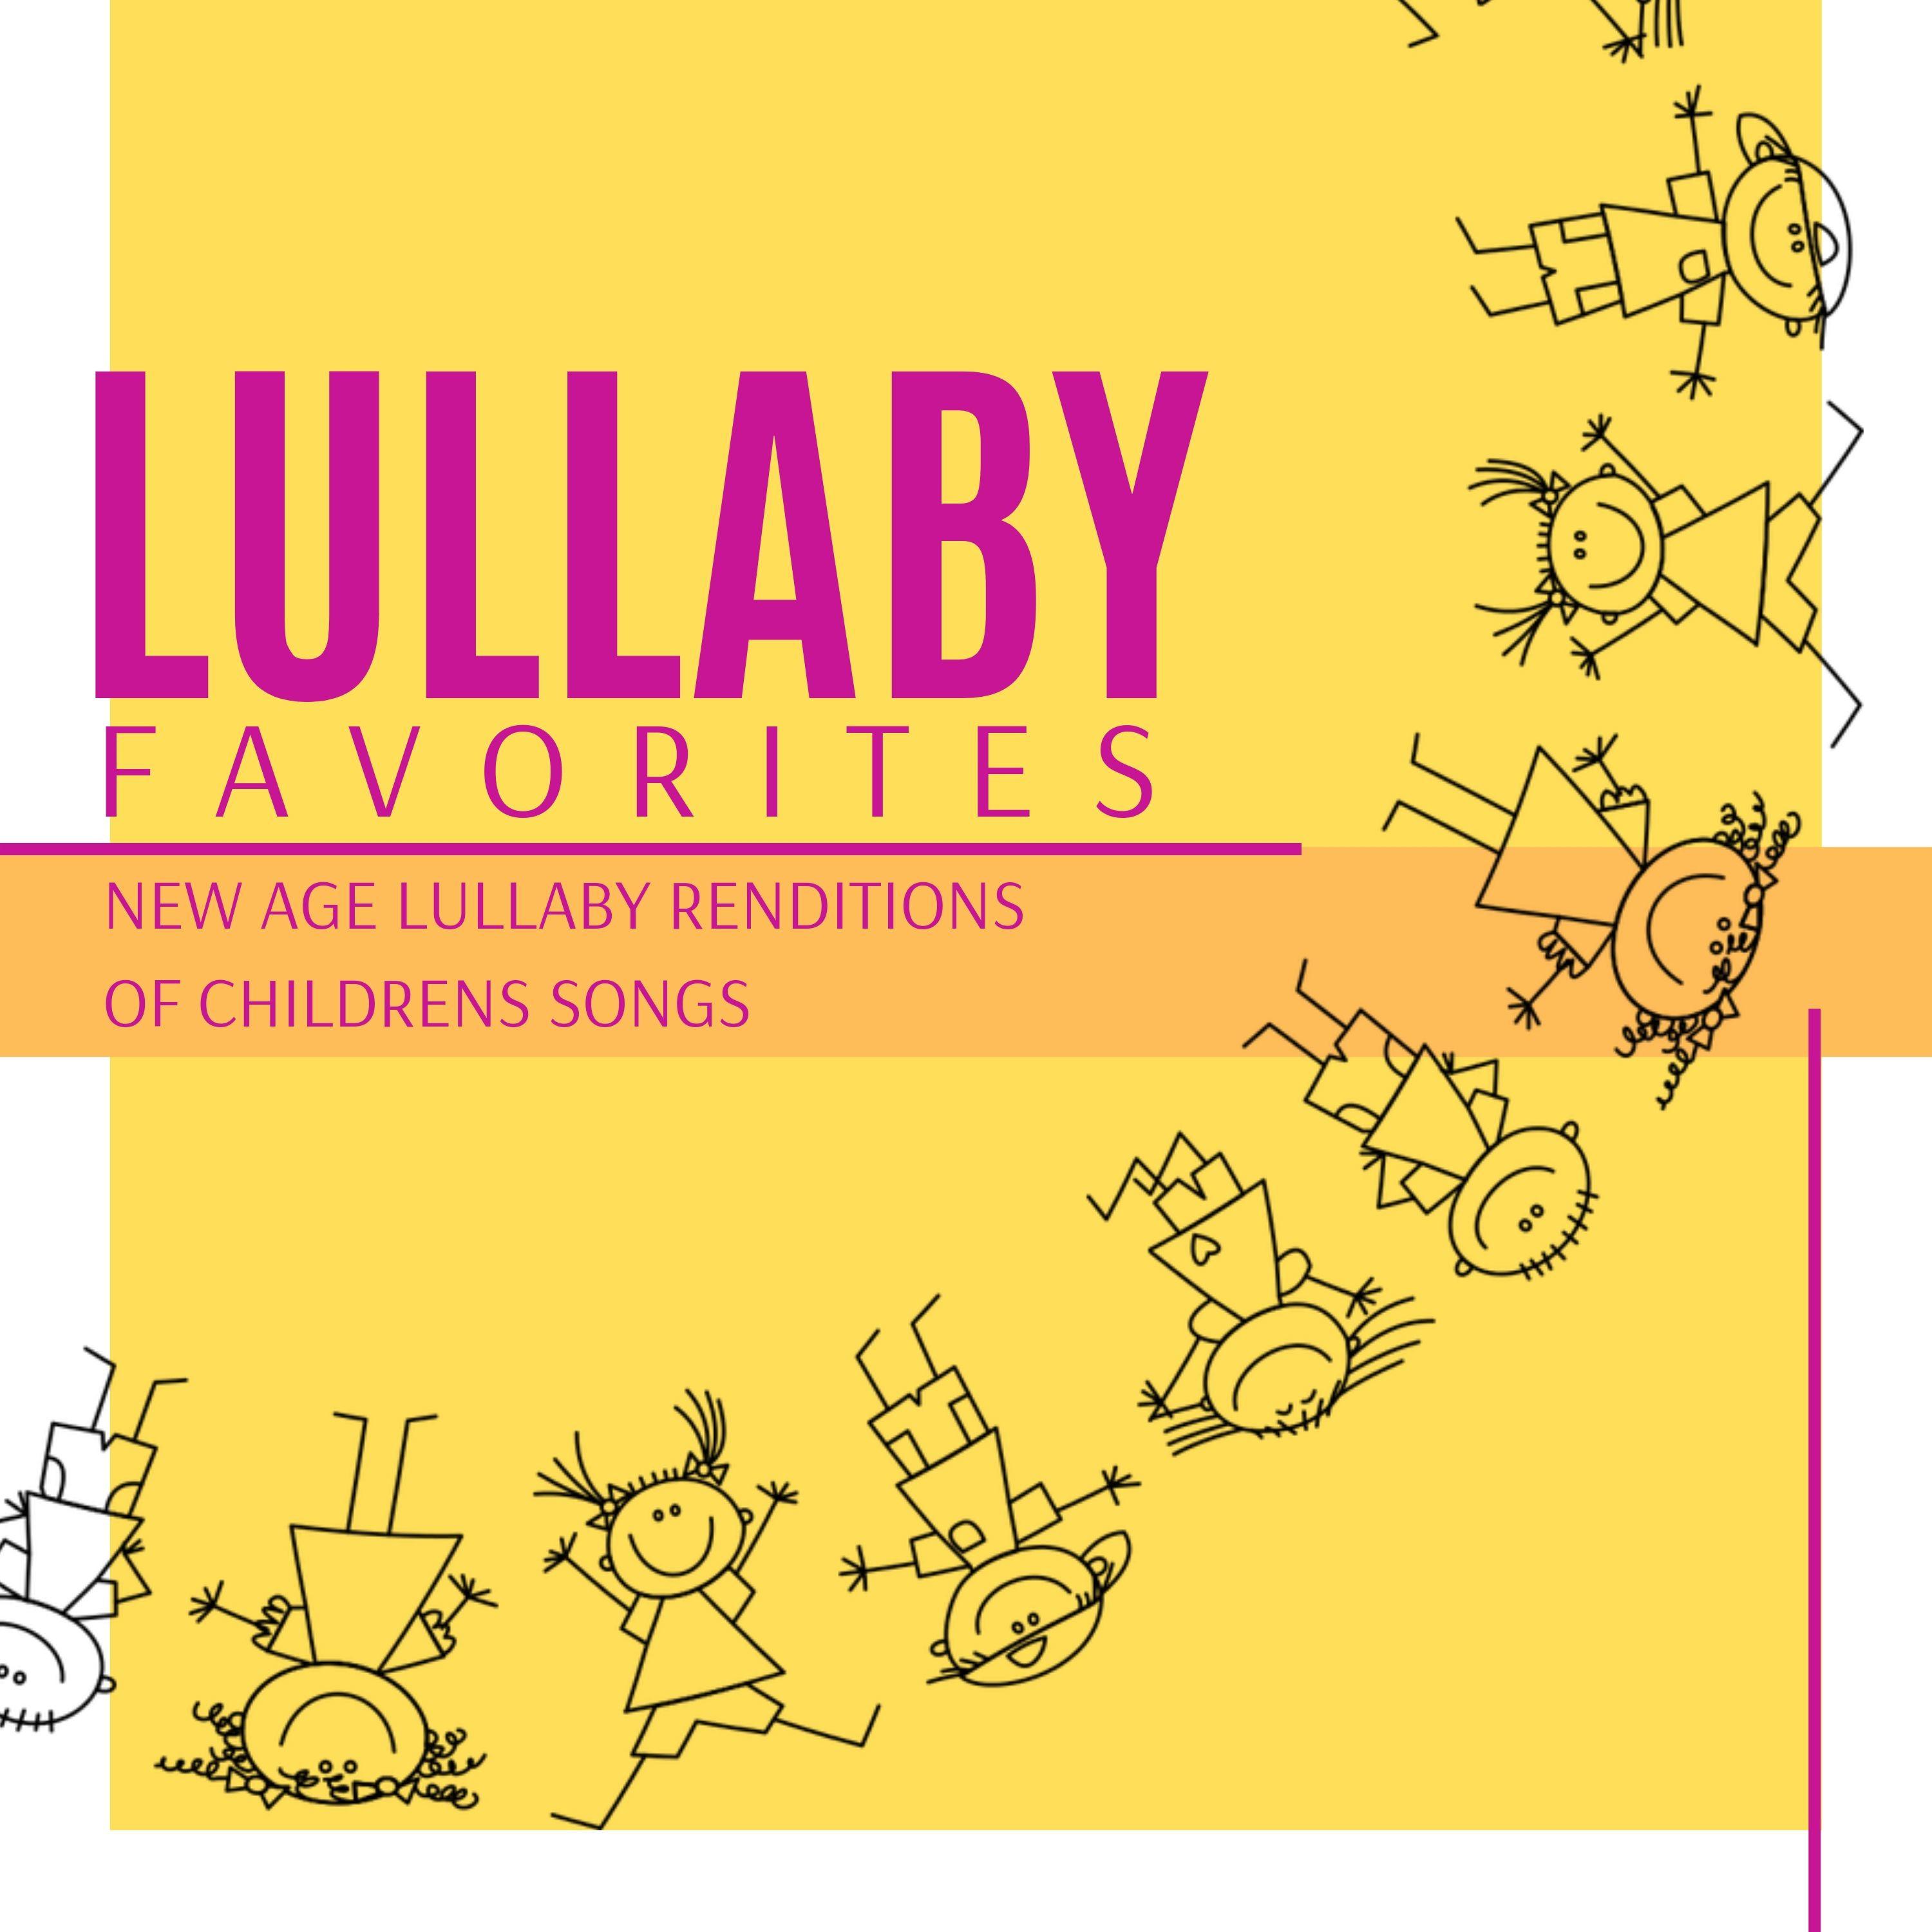 Lullaby Favorites - New Age Lullaby Renditions of Childrens Songs